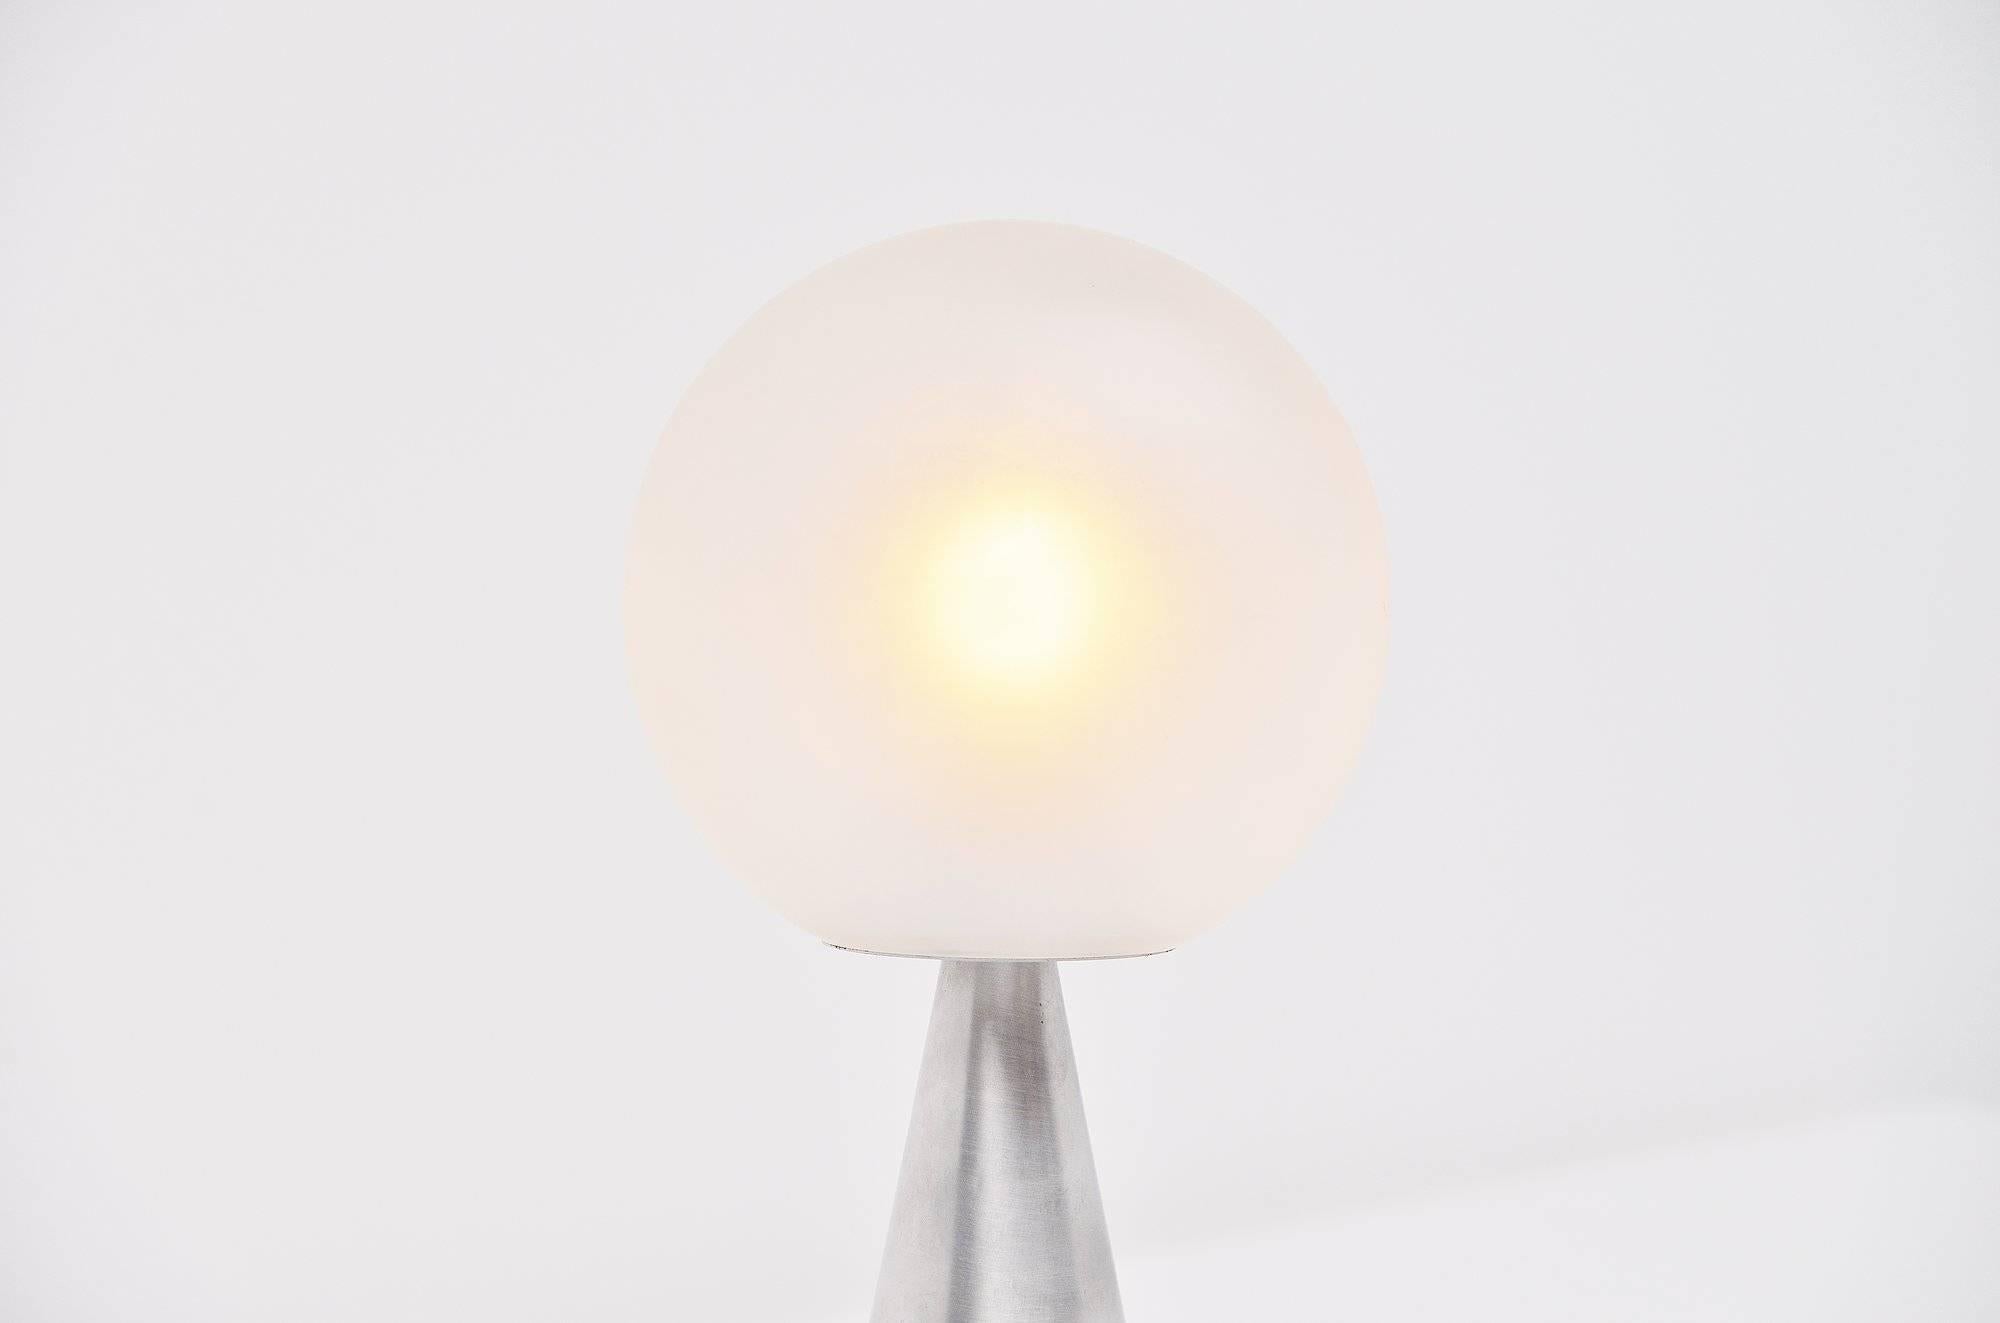 Rare early ‘Bilia’ table lamp Model no. 2474 designed by Gio Ponti, manufactured by Fontana Arte, Italy, 1960. This rare early lamp has an aluminum weighted base and a frosted matte glass globe. The lamp gives very nice and warm spherical light when